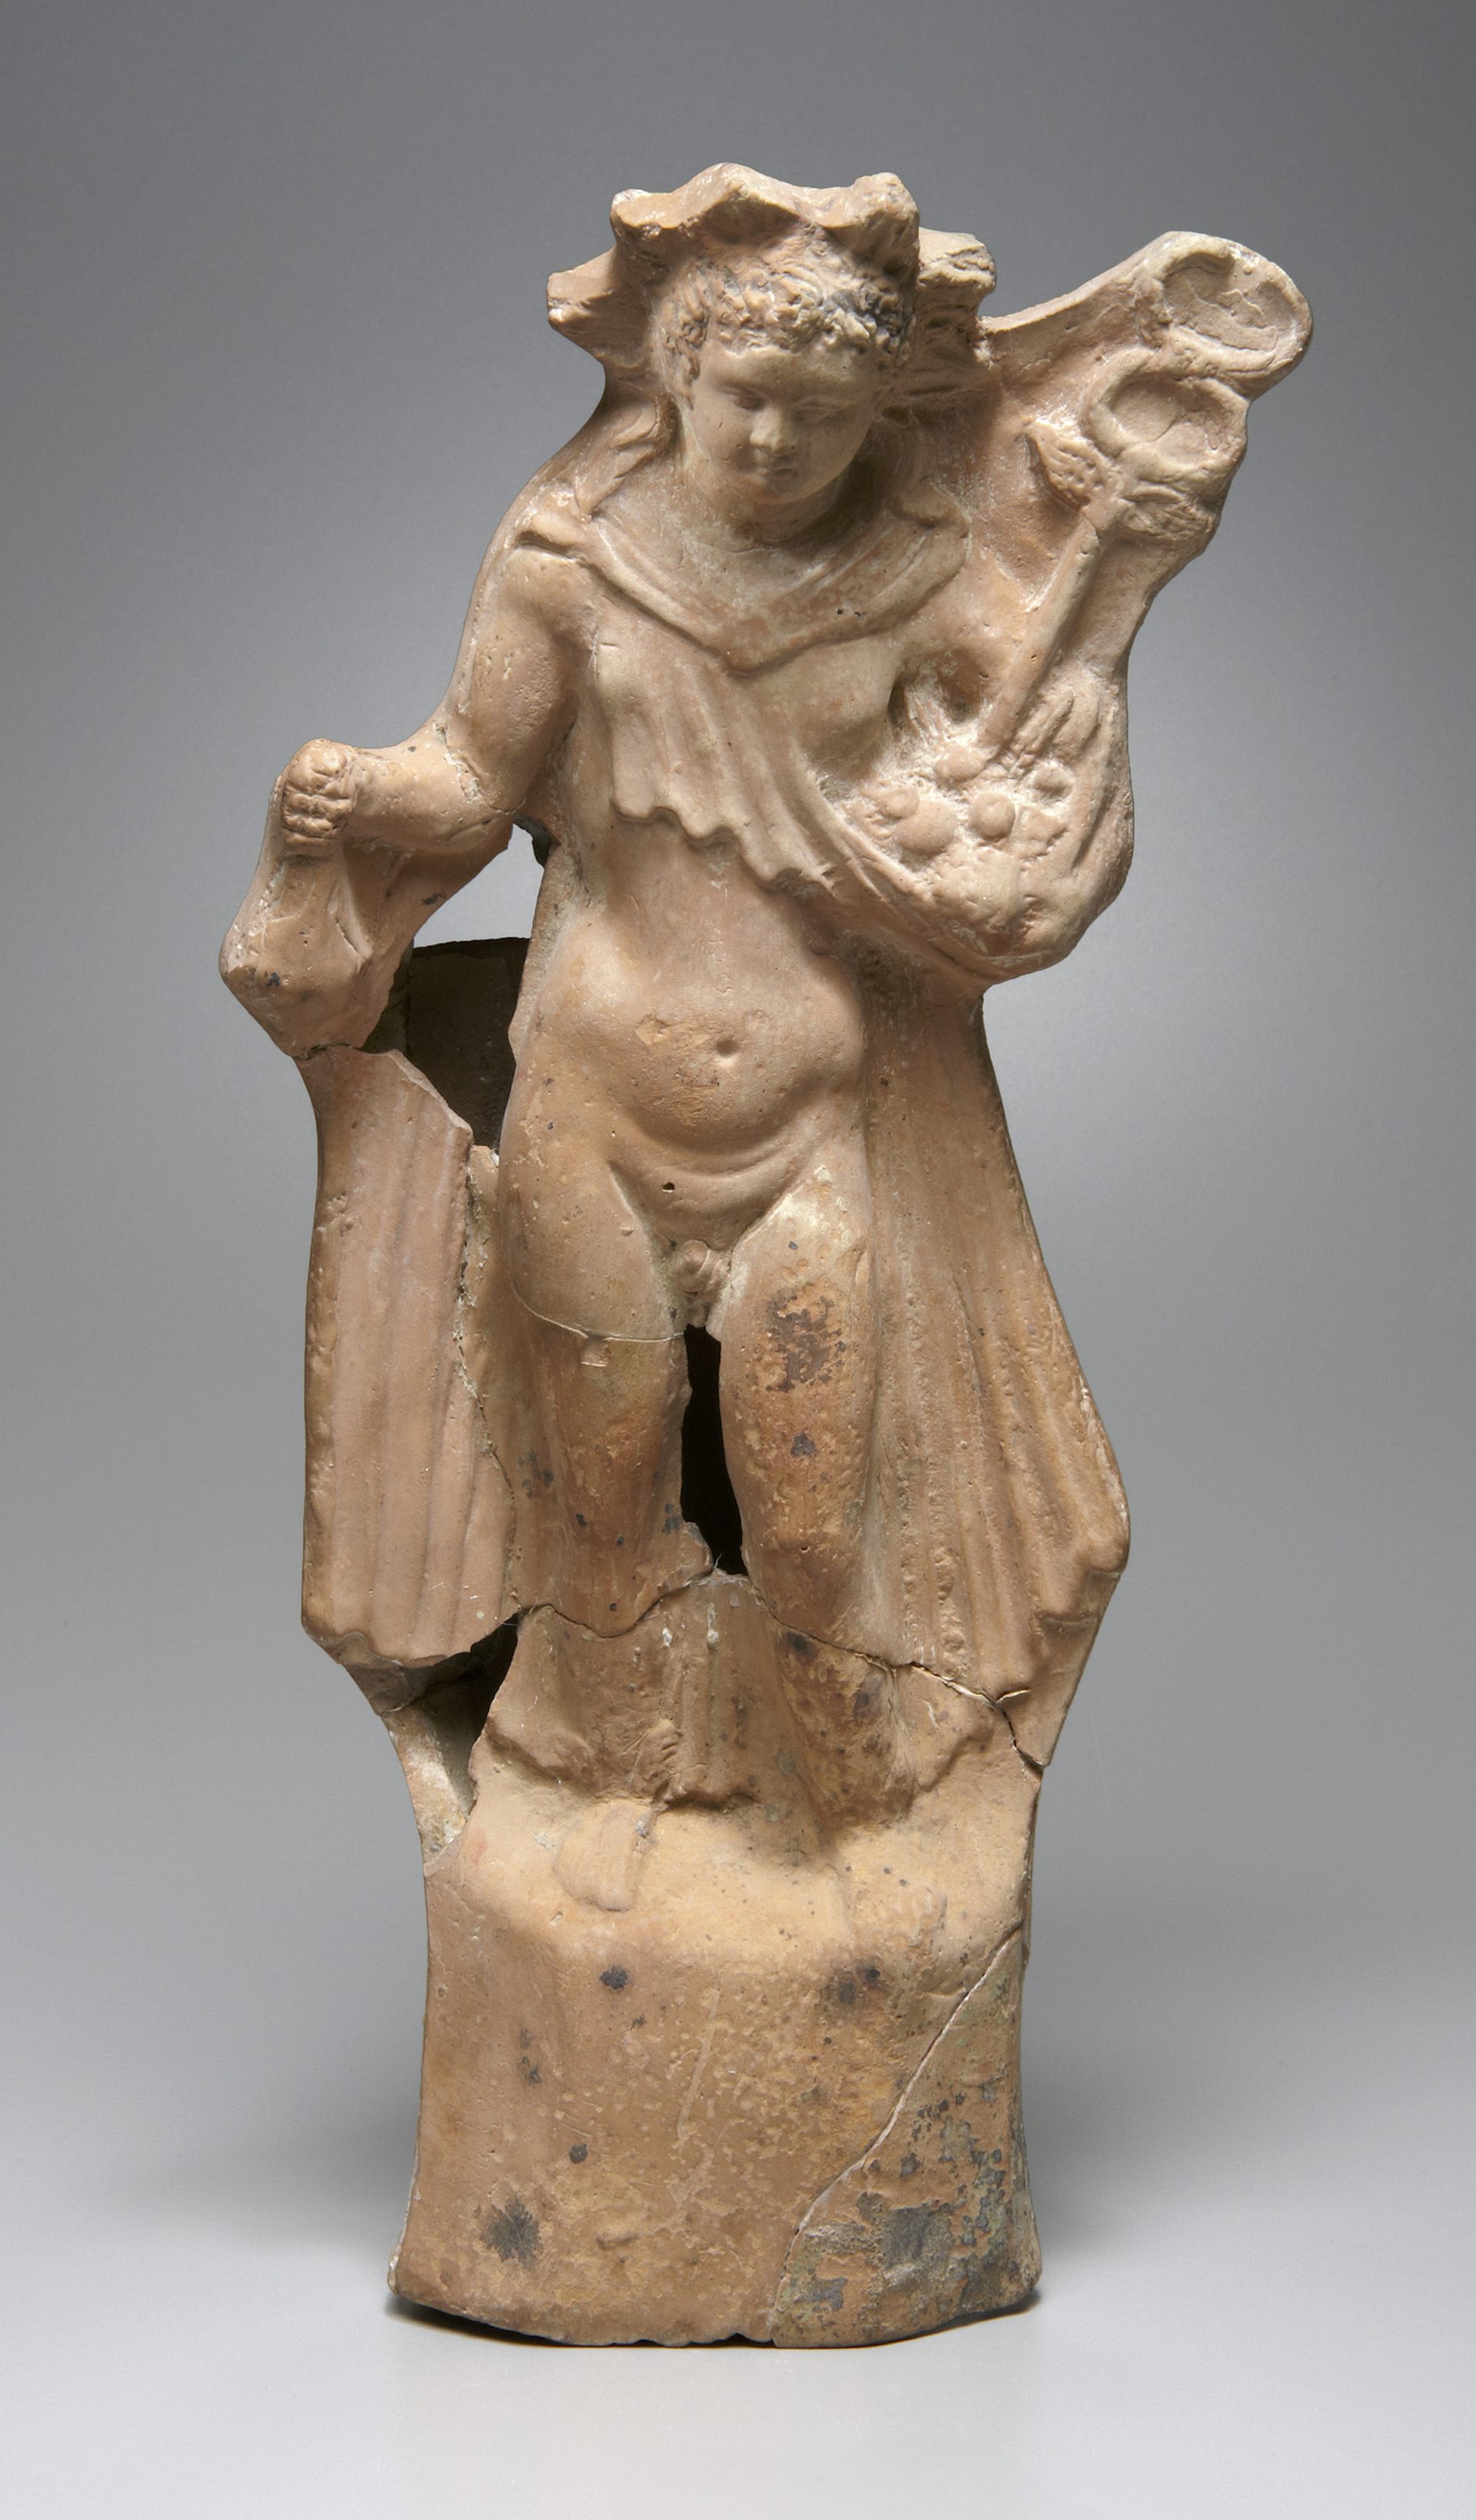 Figurine of Hermes as a child